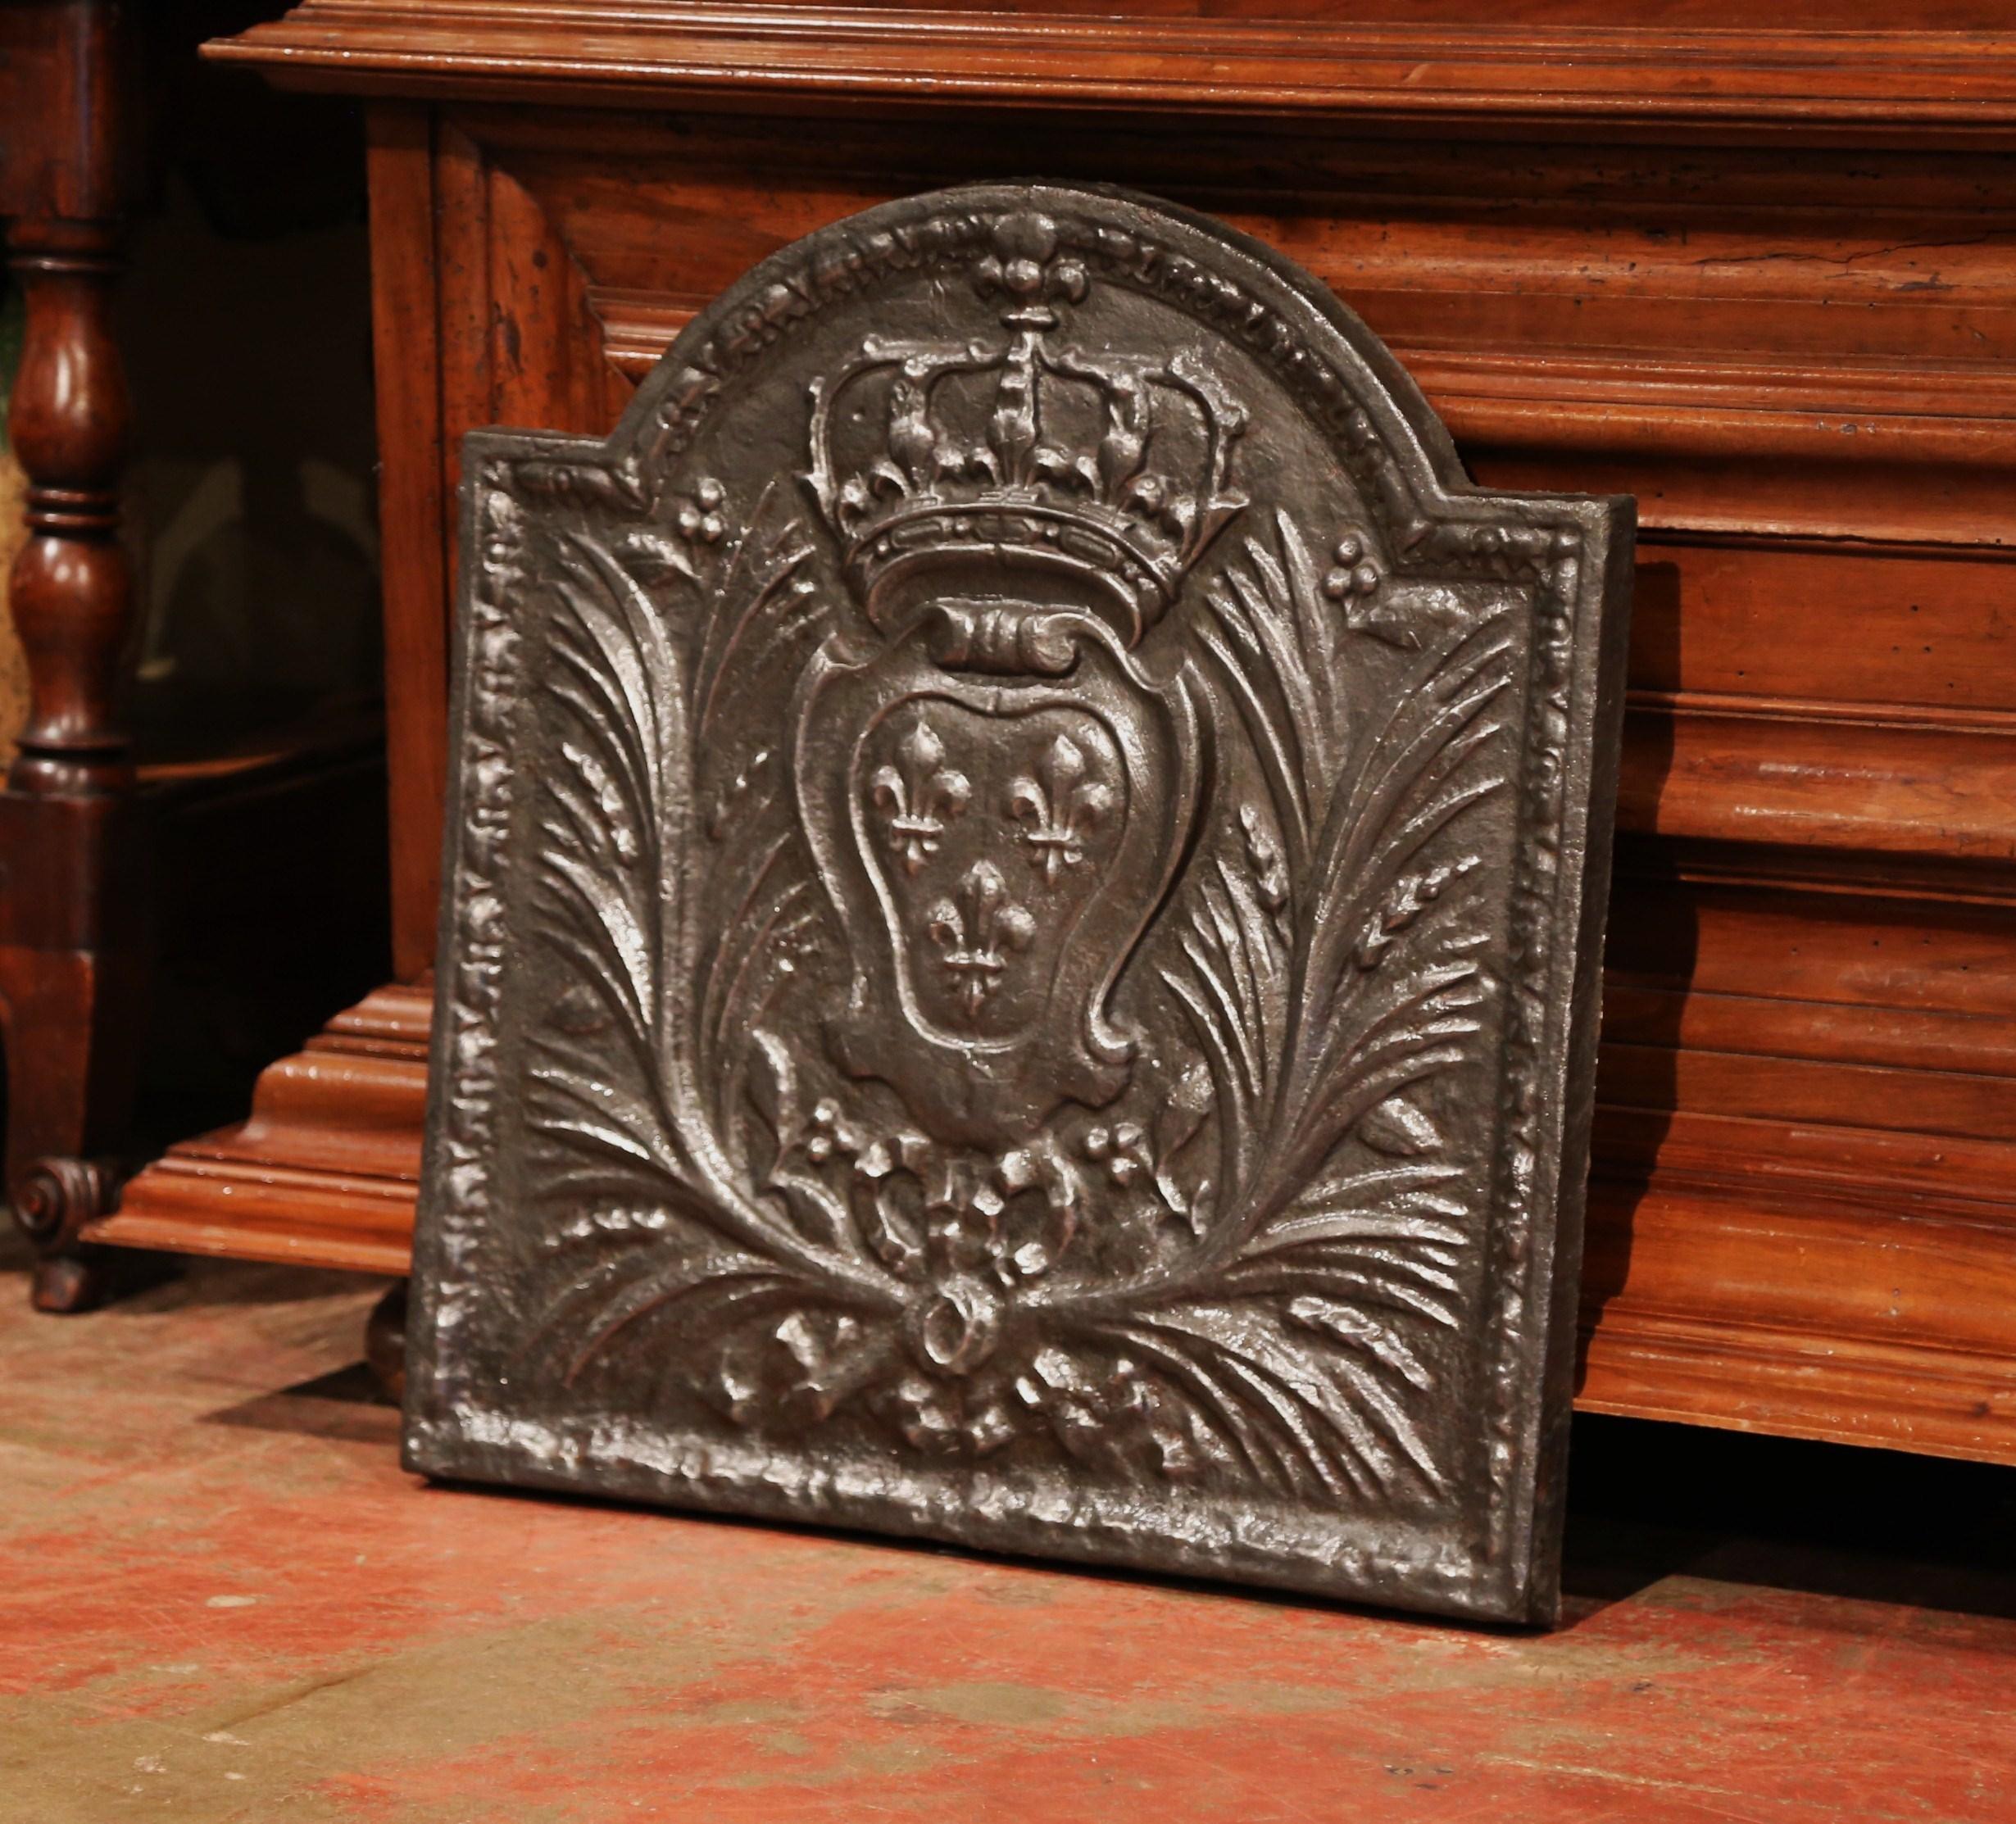 Louis XVI 19th Century Iron Fireback with French Royal Coat of Arms and Fleurs-de-Lys